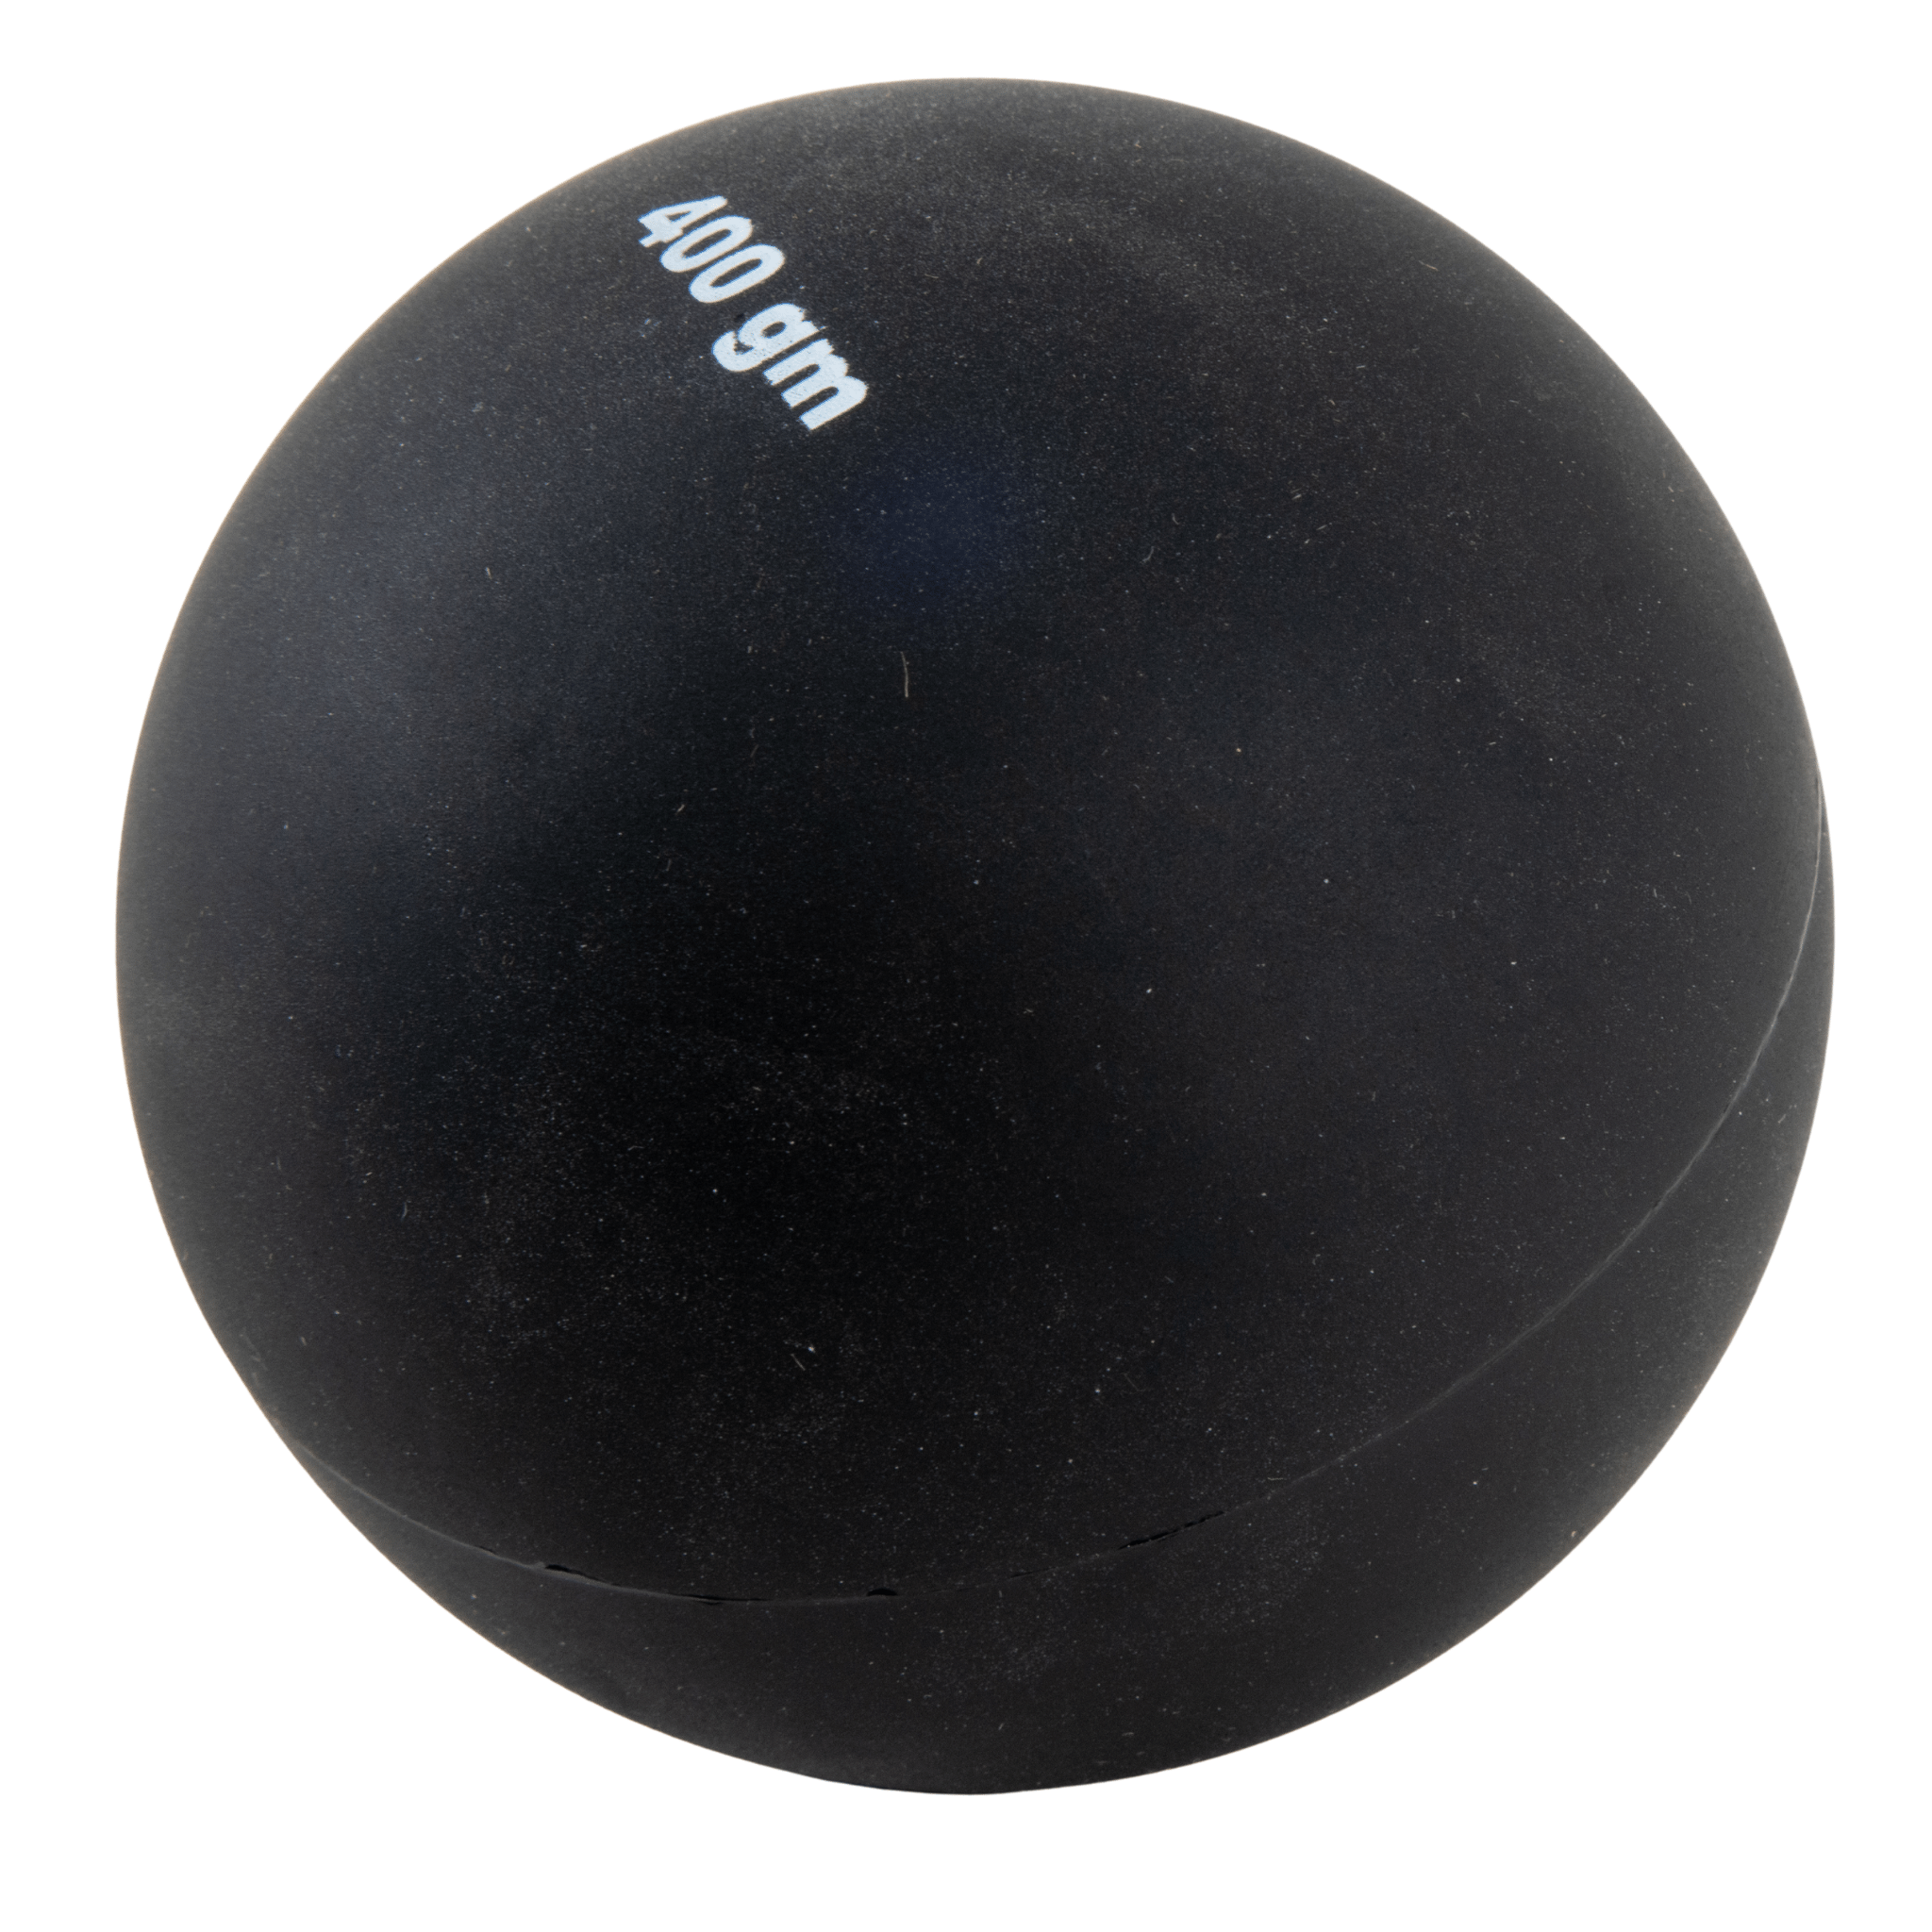 Rubber Coated Throwing Ball